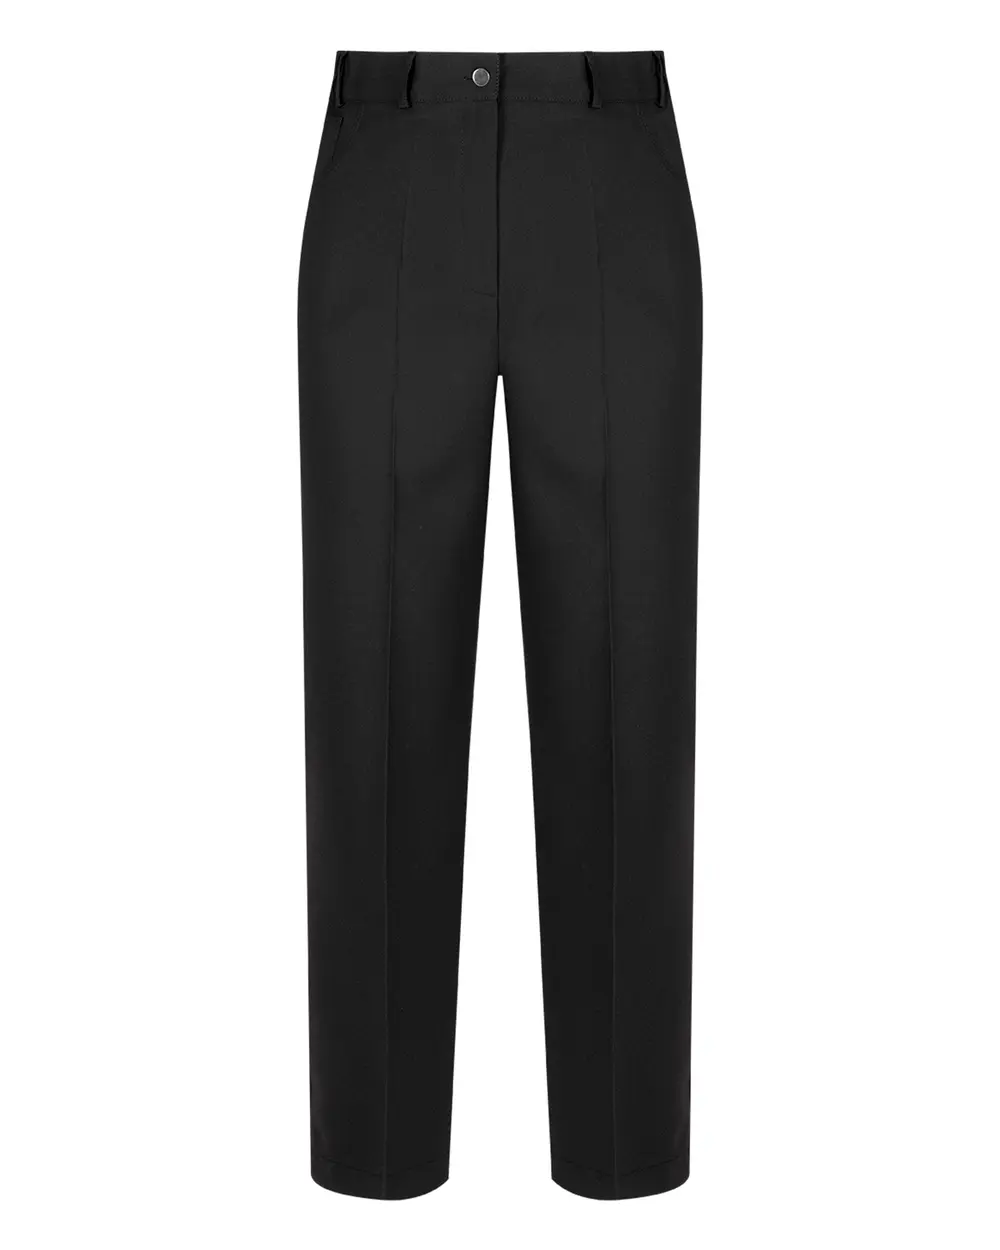 Buy Black Senior Tapered Trousers (9-17yrs) from the Next UK online shop